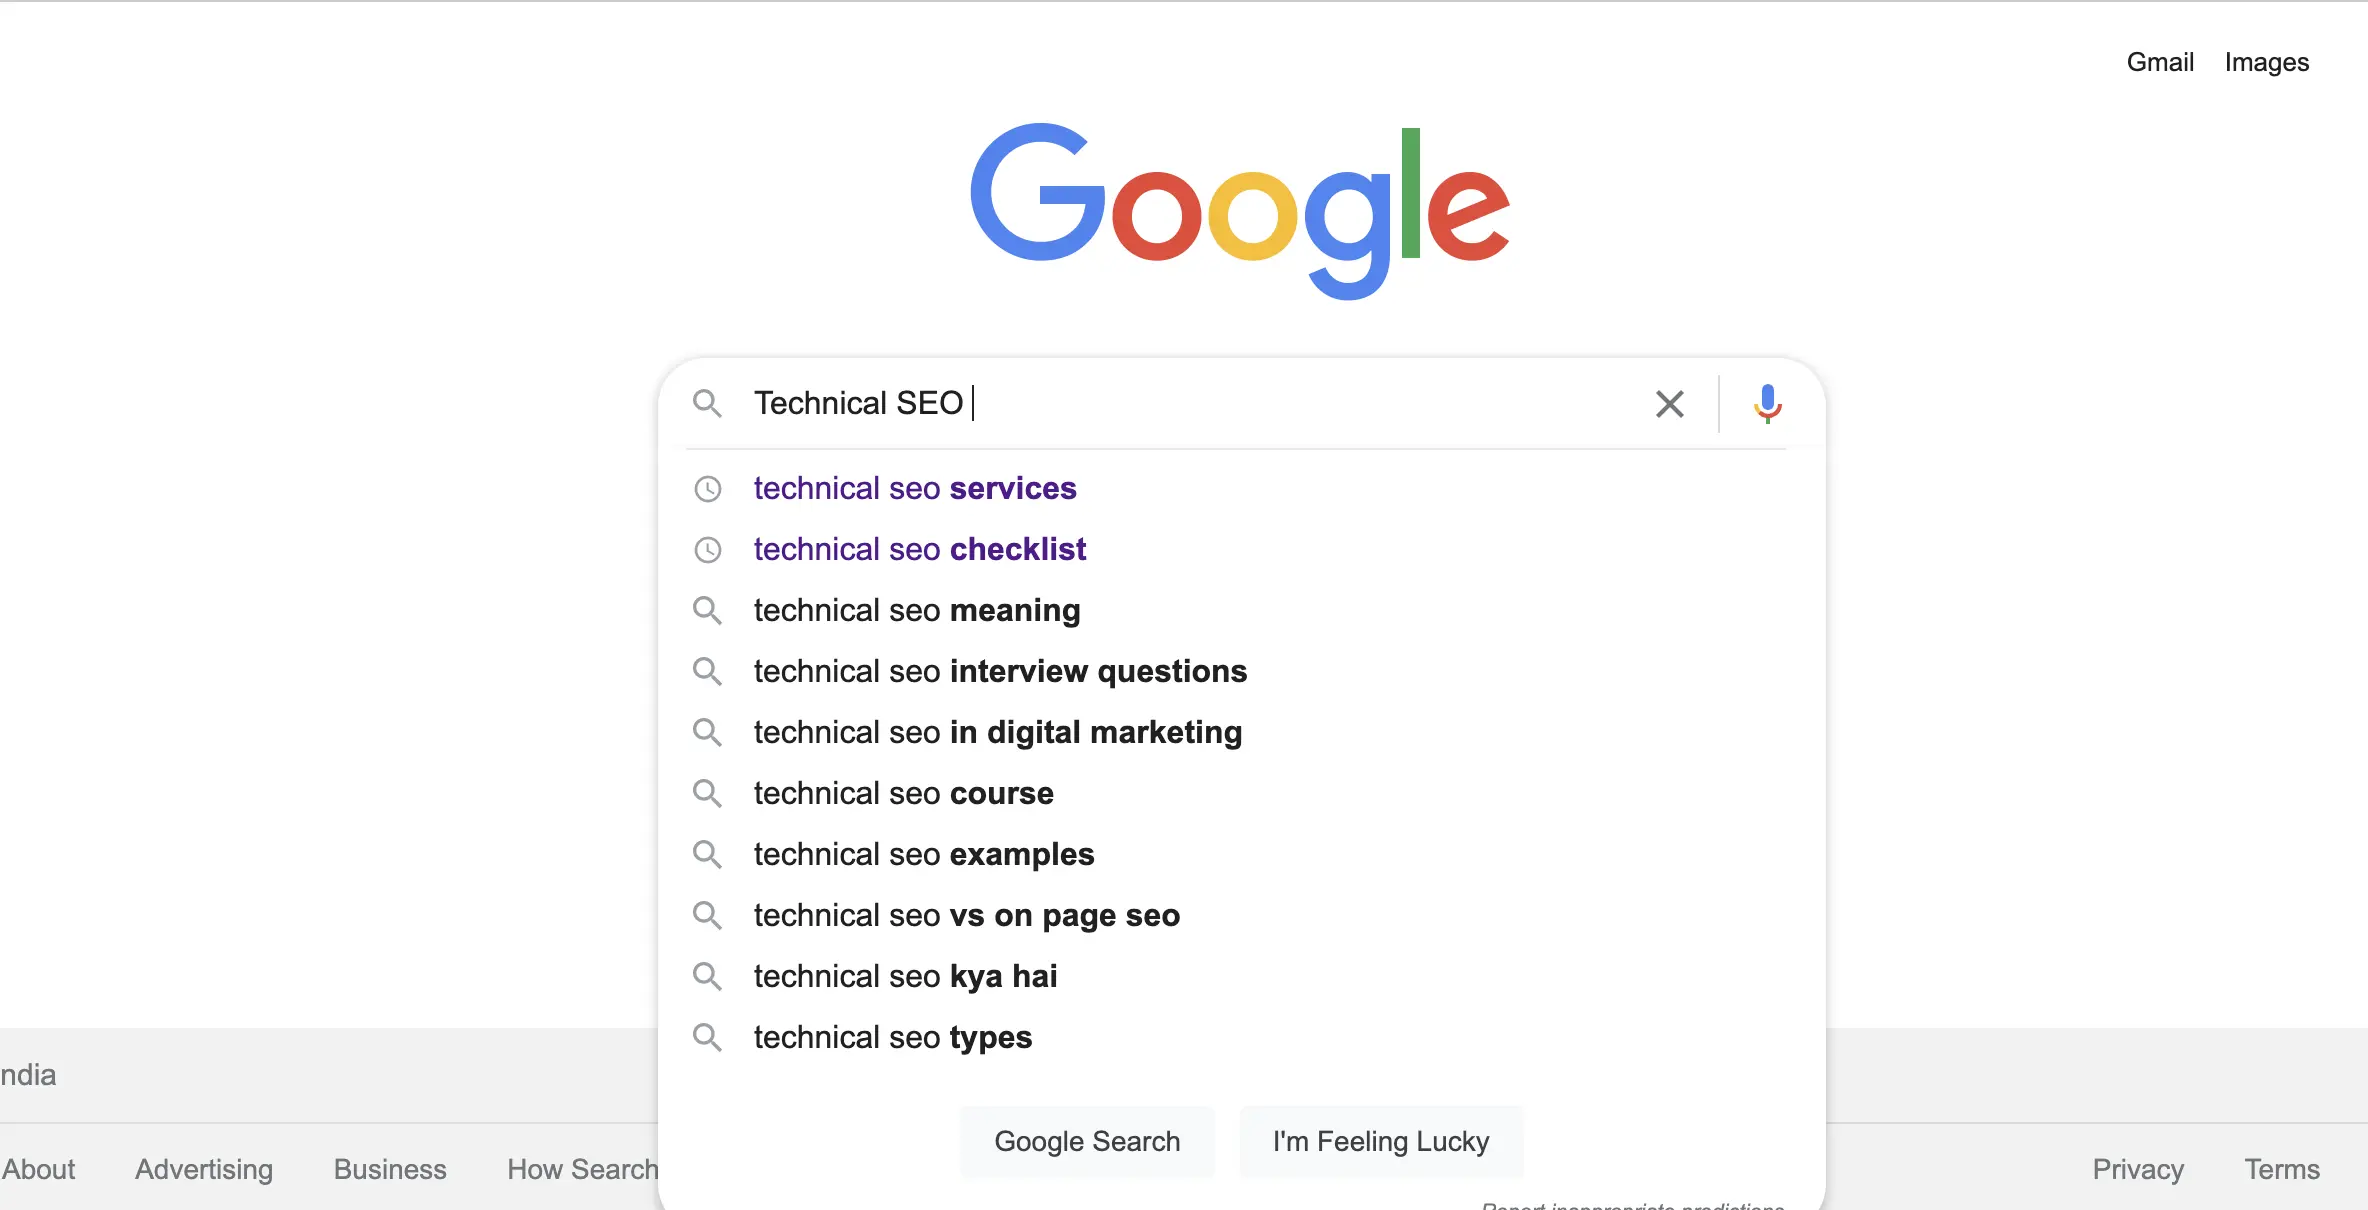 Google Autocomplete - Space after search term